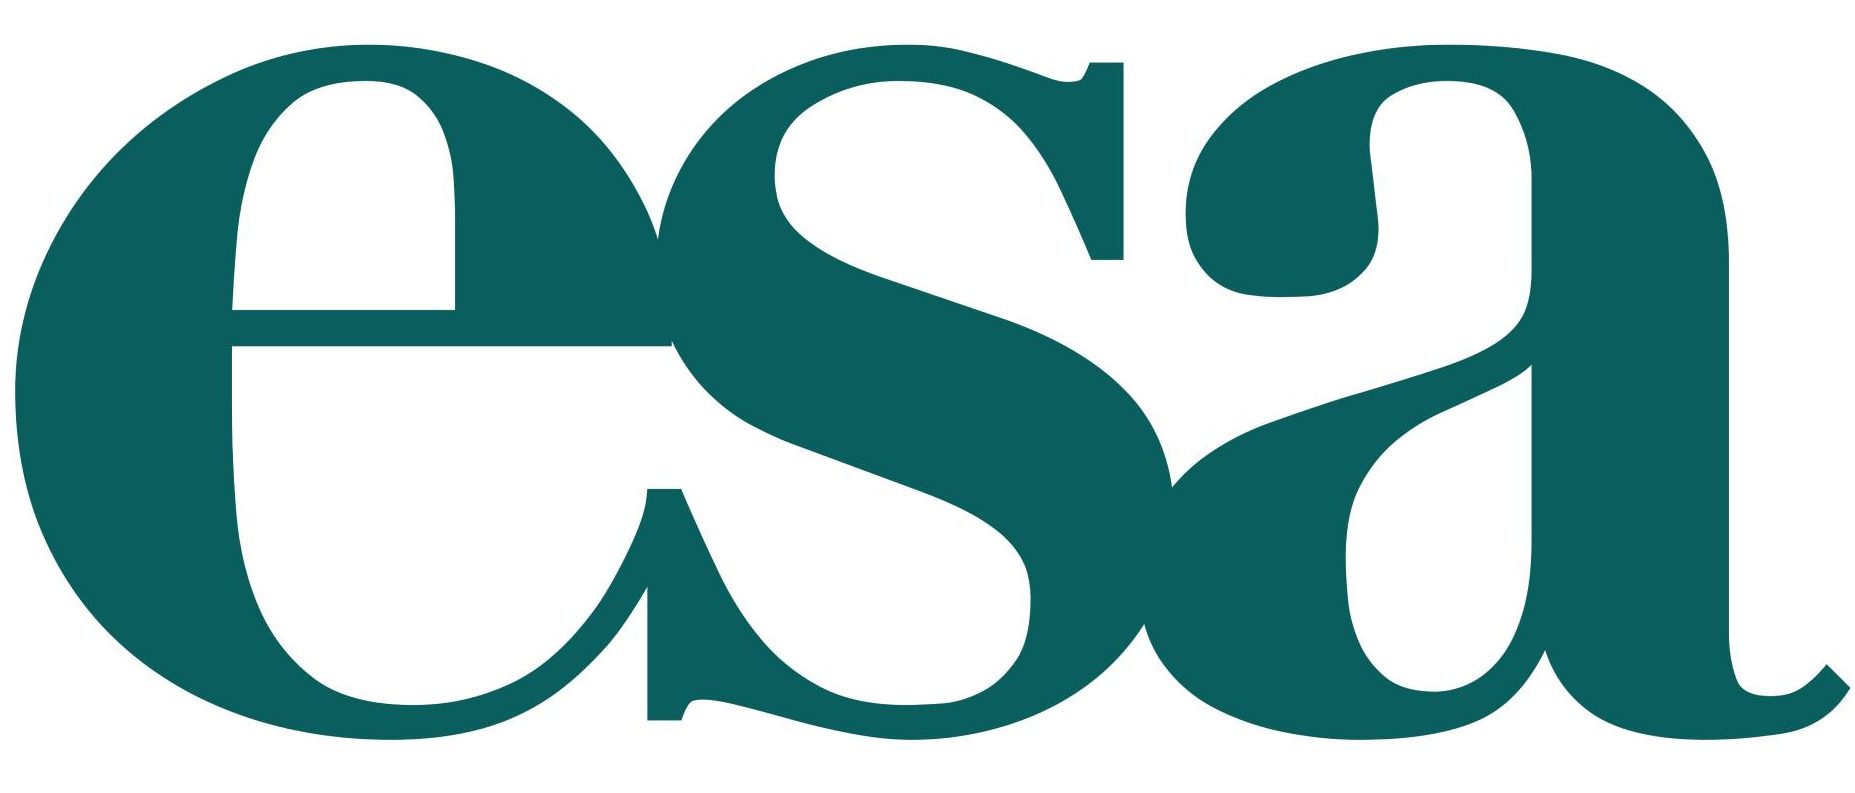 Logo of the Ecological Society of America